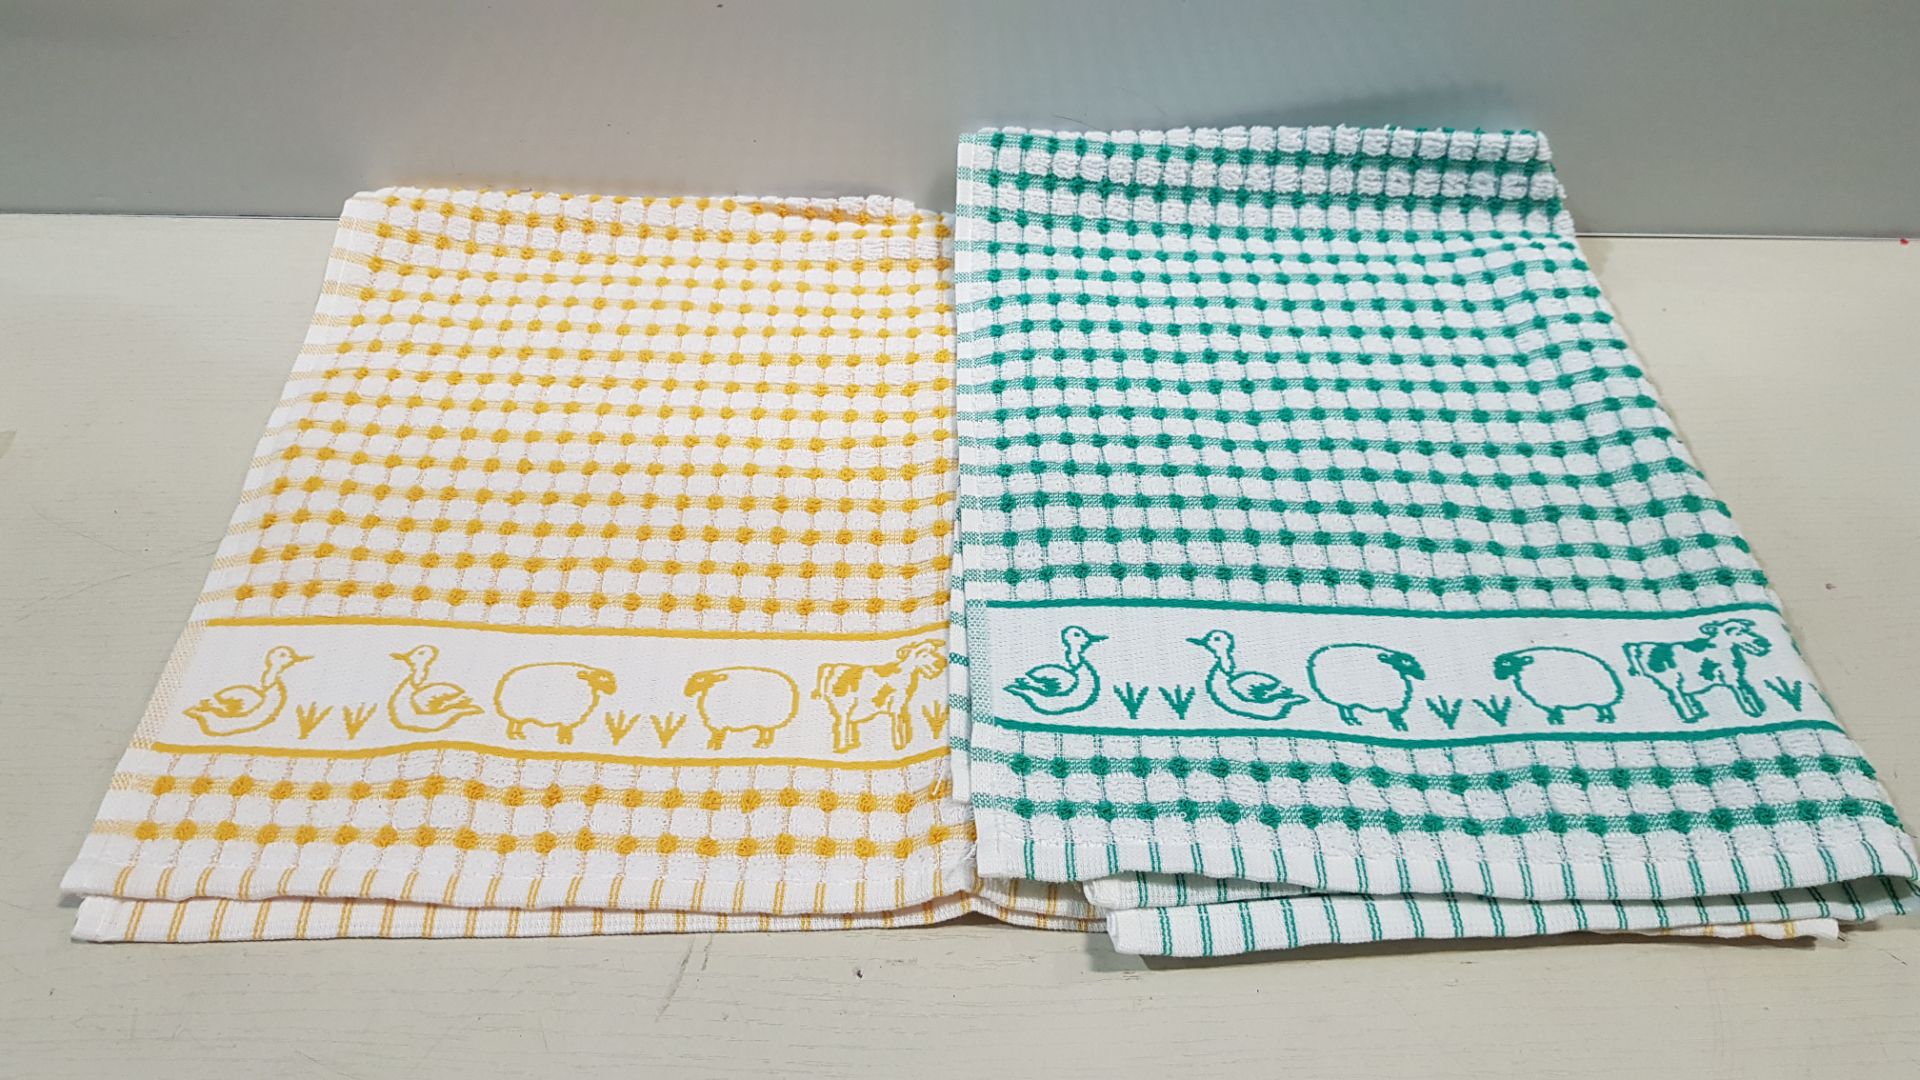 144 X BRAND NEW TEA / KITCHEN TOWELS - IN 2 COLOURS- ( 50 X 70 CM ) IN 2 BOXES 1 BOX YELLOW 1 BOX